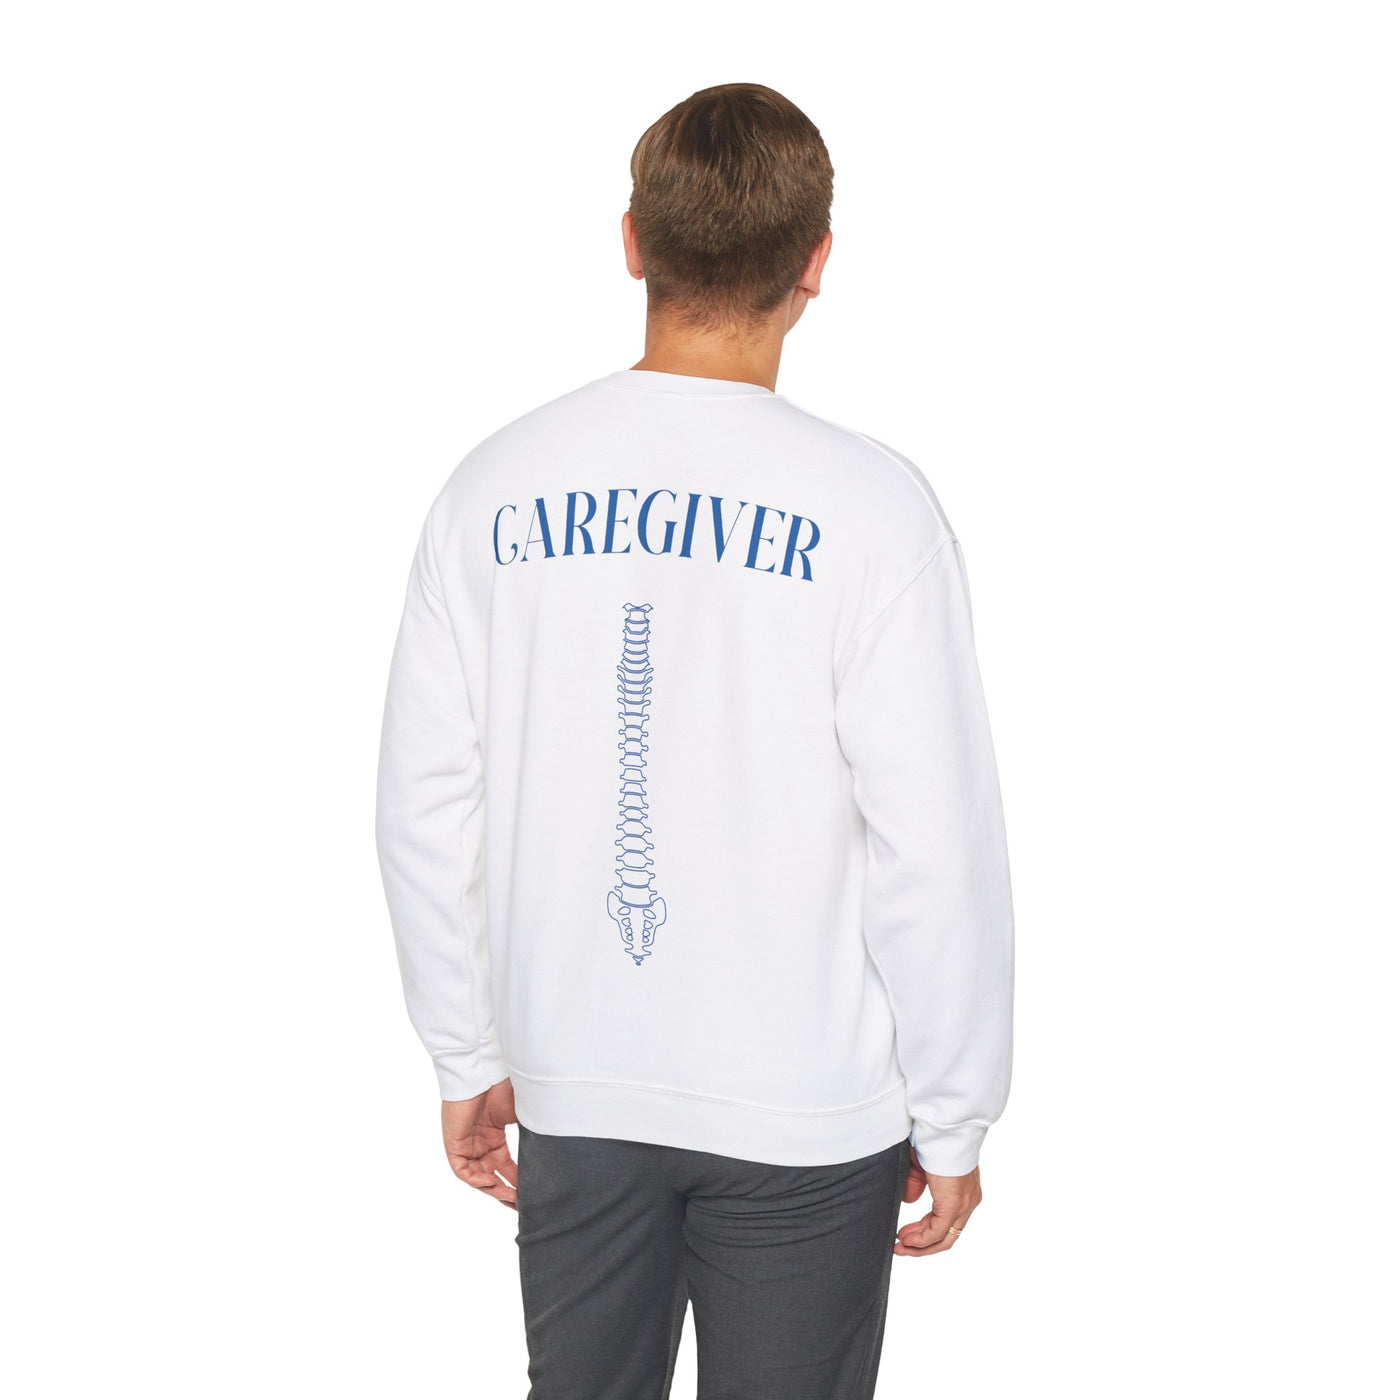 Caregivers-Backbone of our Society Crewneck